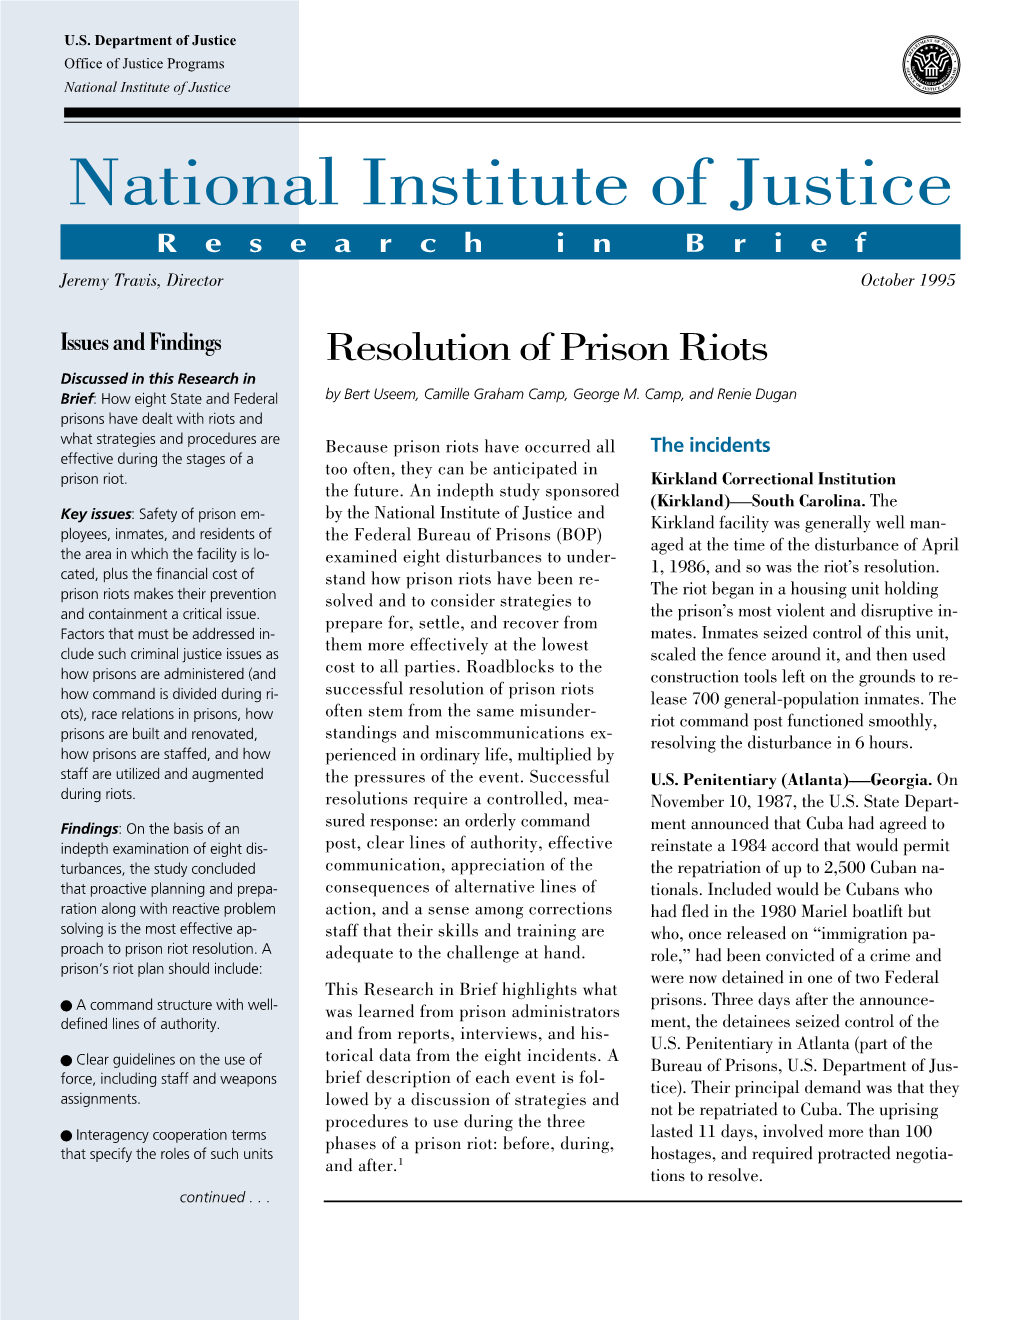 Resolution of Prison Riots Discussed in This Research in Brief: How Eight State and Federal by Bert Useem, Camille Graham Camp, George M